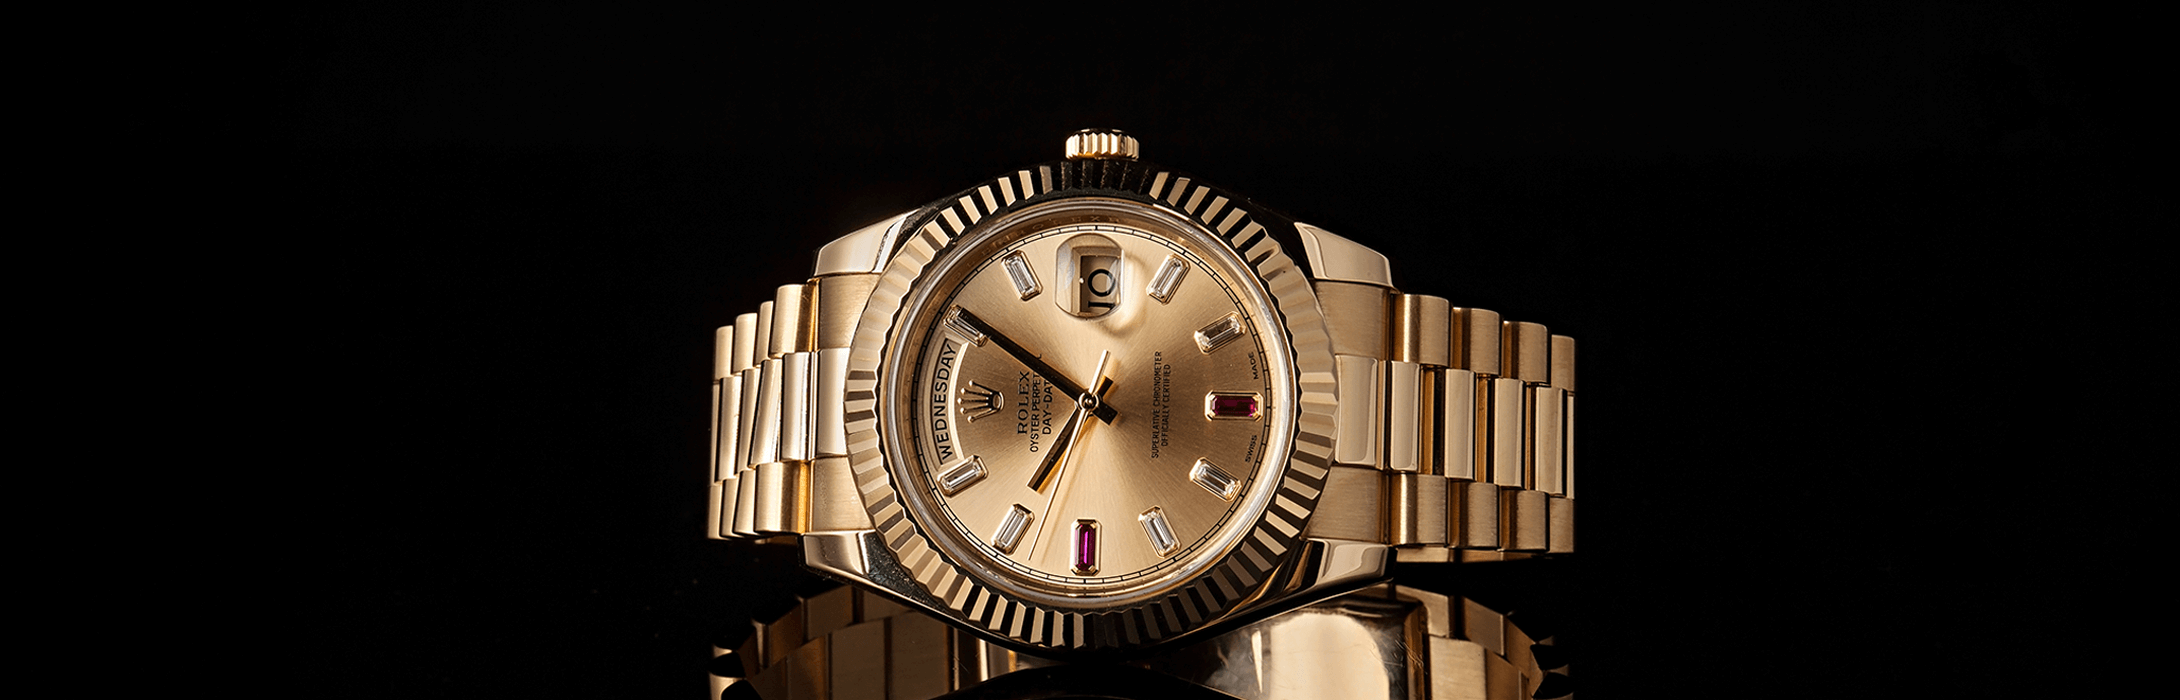 Finance Your Rolex Just in Time for the Holidays